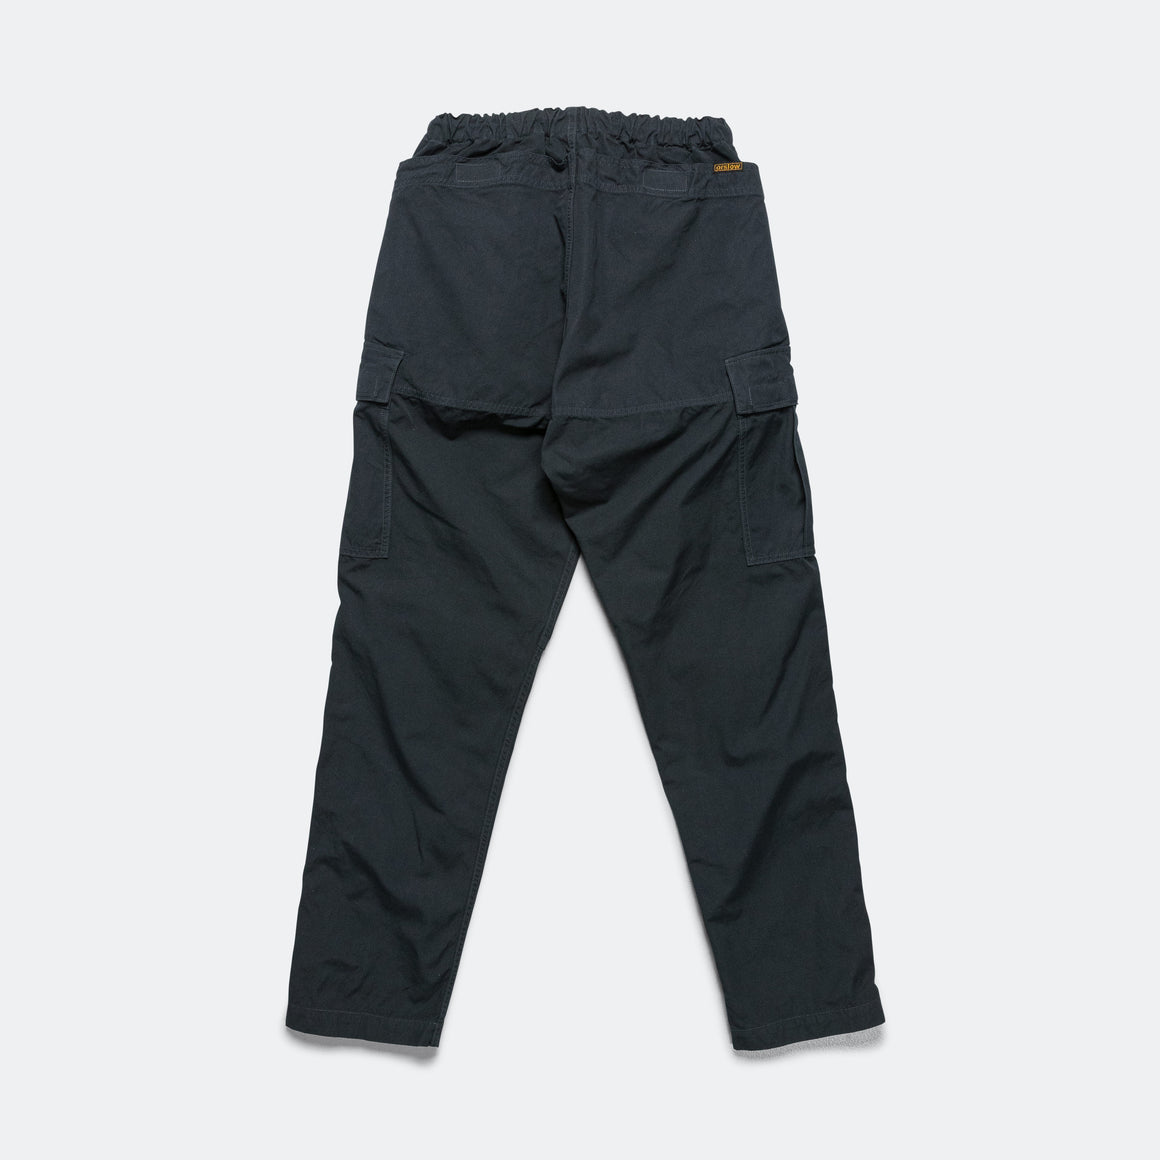 orSlow - Easy Cargo Pants - Charcoal Gray - UP THERE